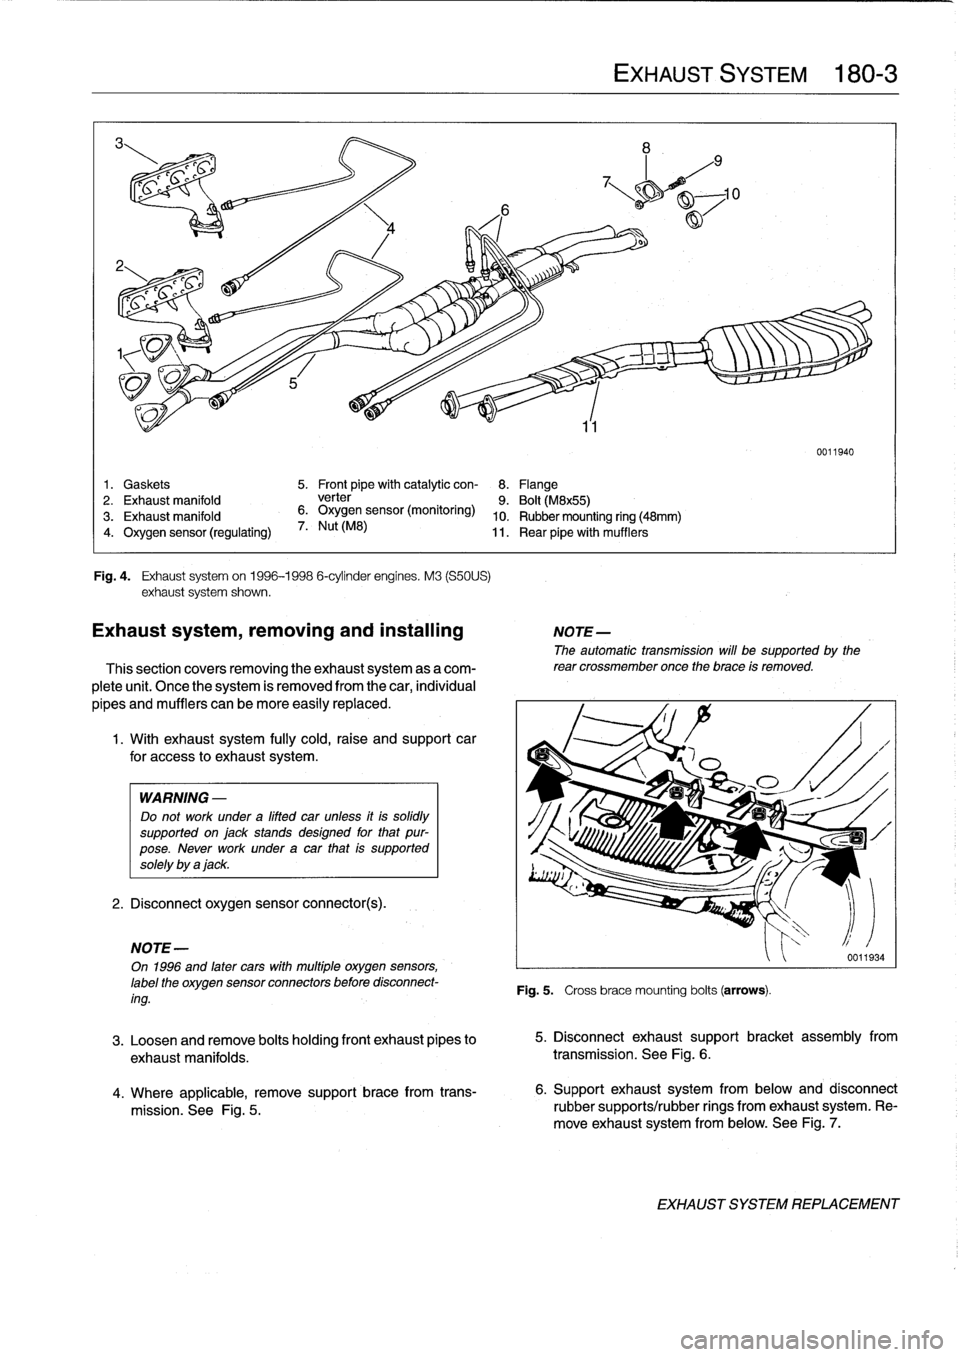 BMW 325i 1997 E36 Service Manual 
1
.

	

Gaskets

	

5
.

	

Front
pipe
with
catalytic
con-

	

8
.

	

Flange
2
.

	

Exhaust
manifold

	

verter

	

9
.

	

Bolt
(M8x55)

3
.
Exhaust
manifold

	

6
.
Oxygen
sensor
(monitoring)

	
